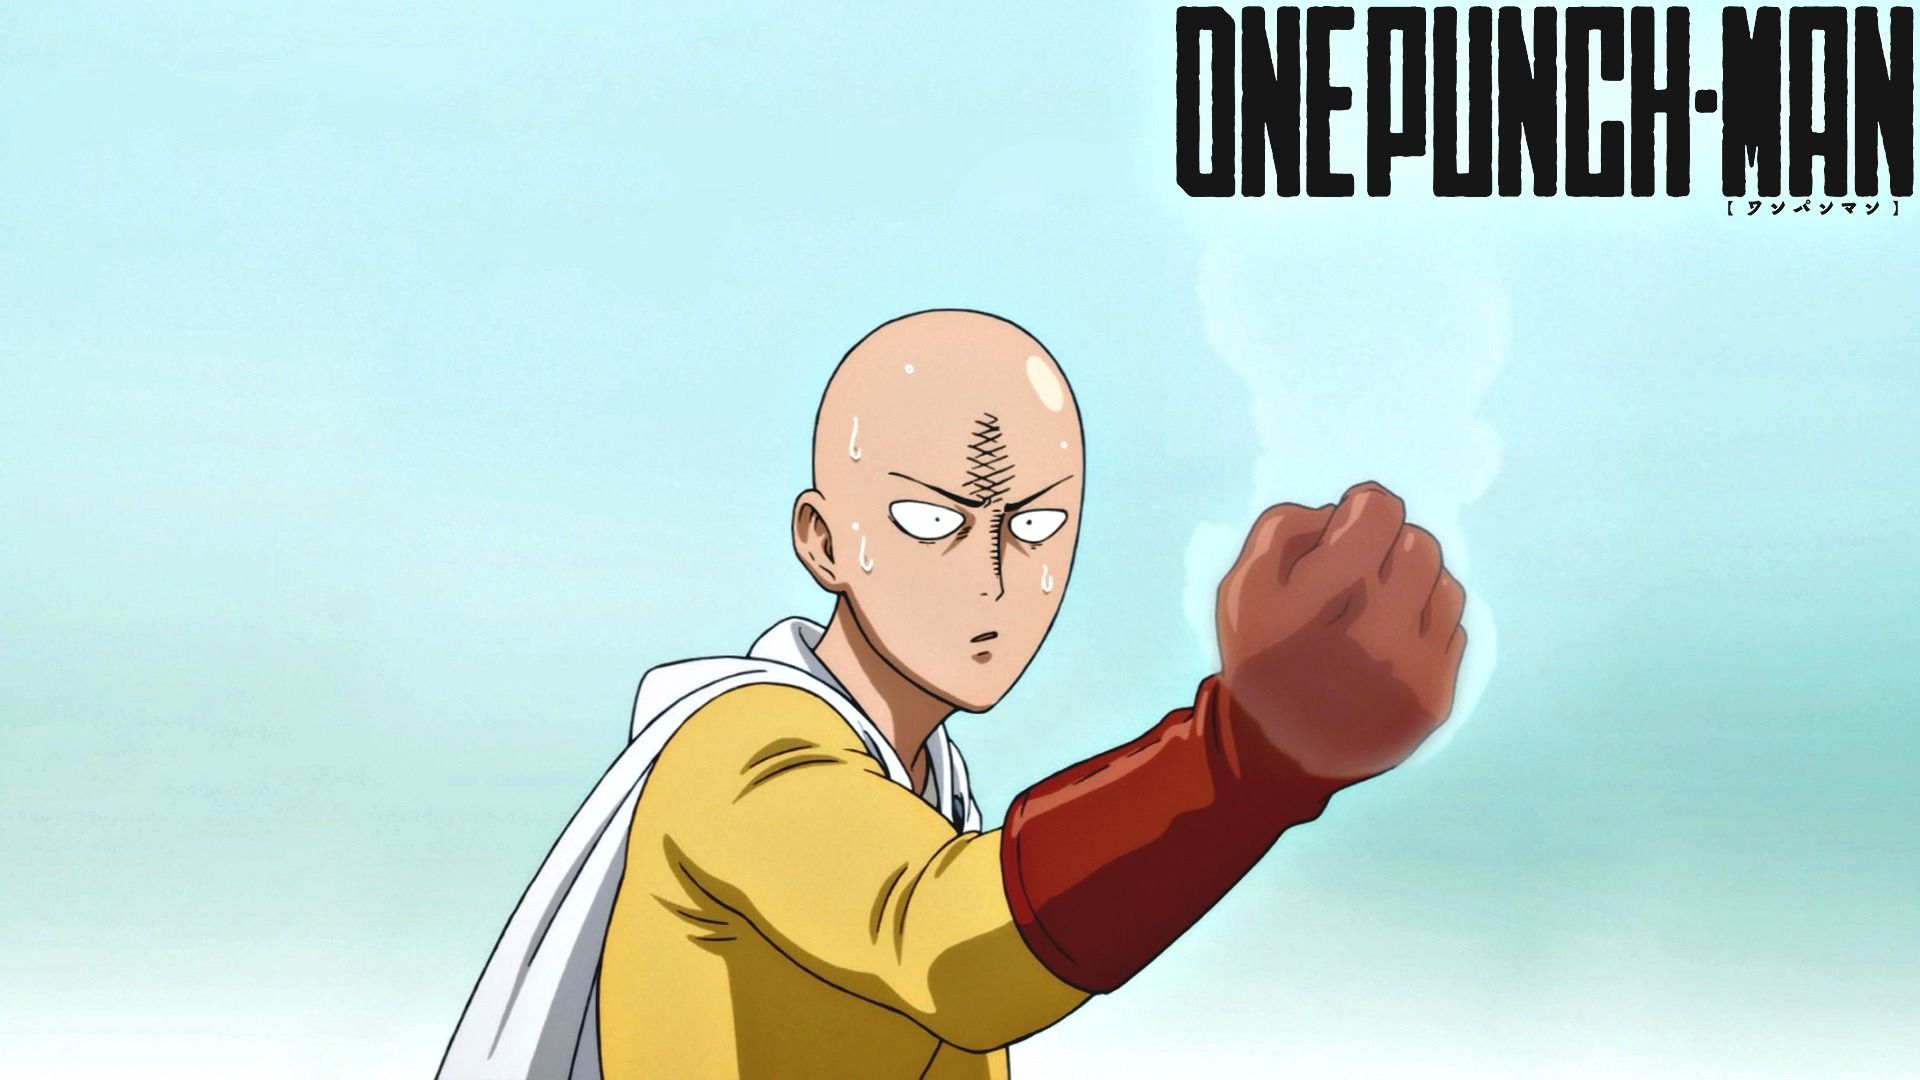 Android One Punch Man Funny Wallpaper